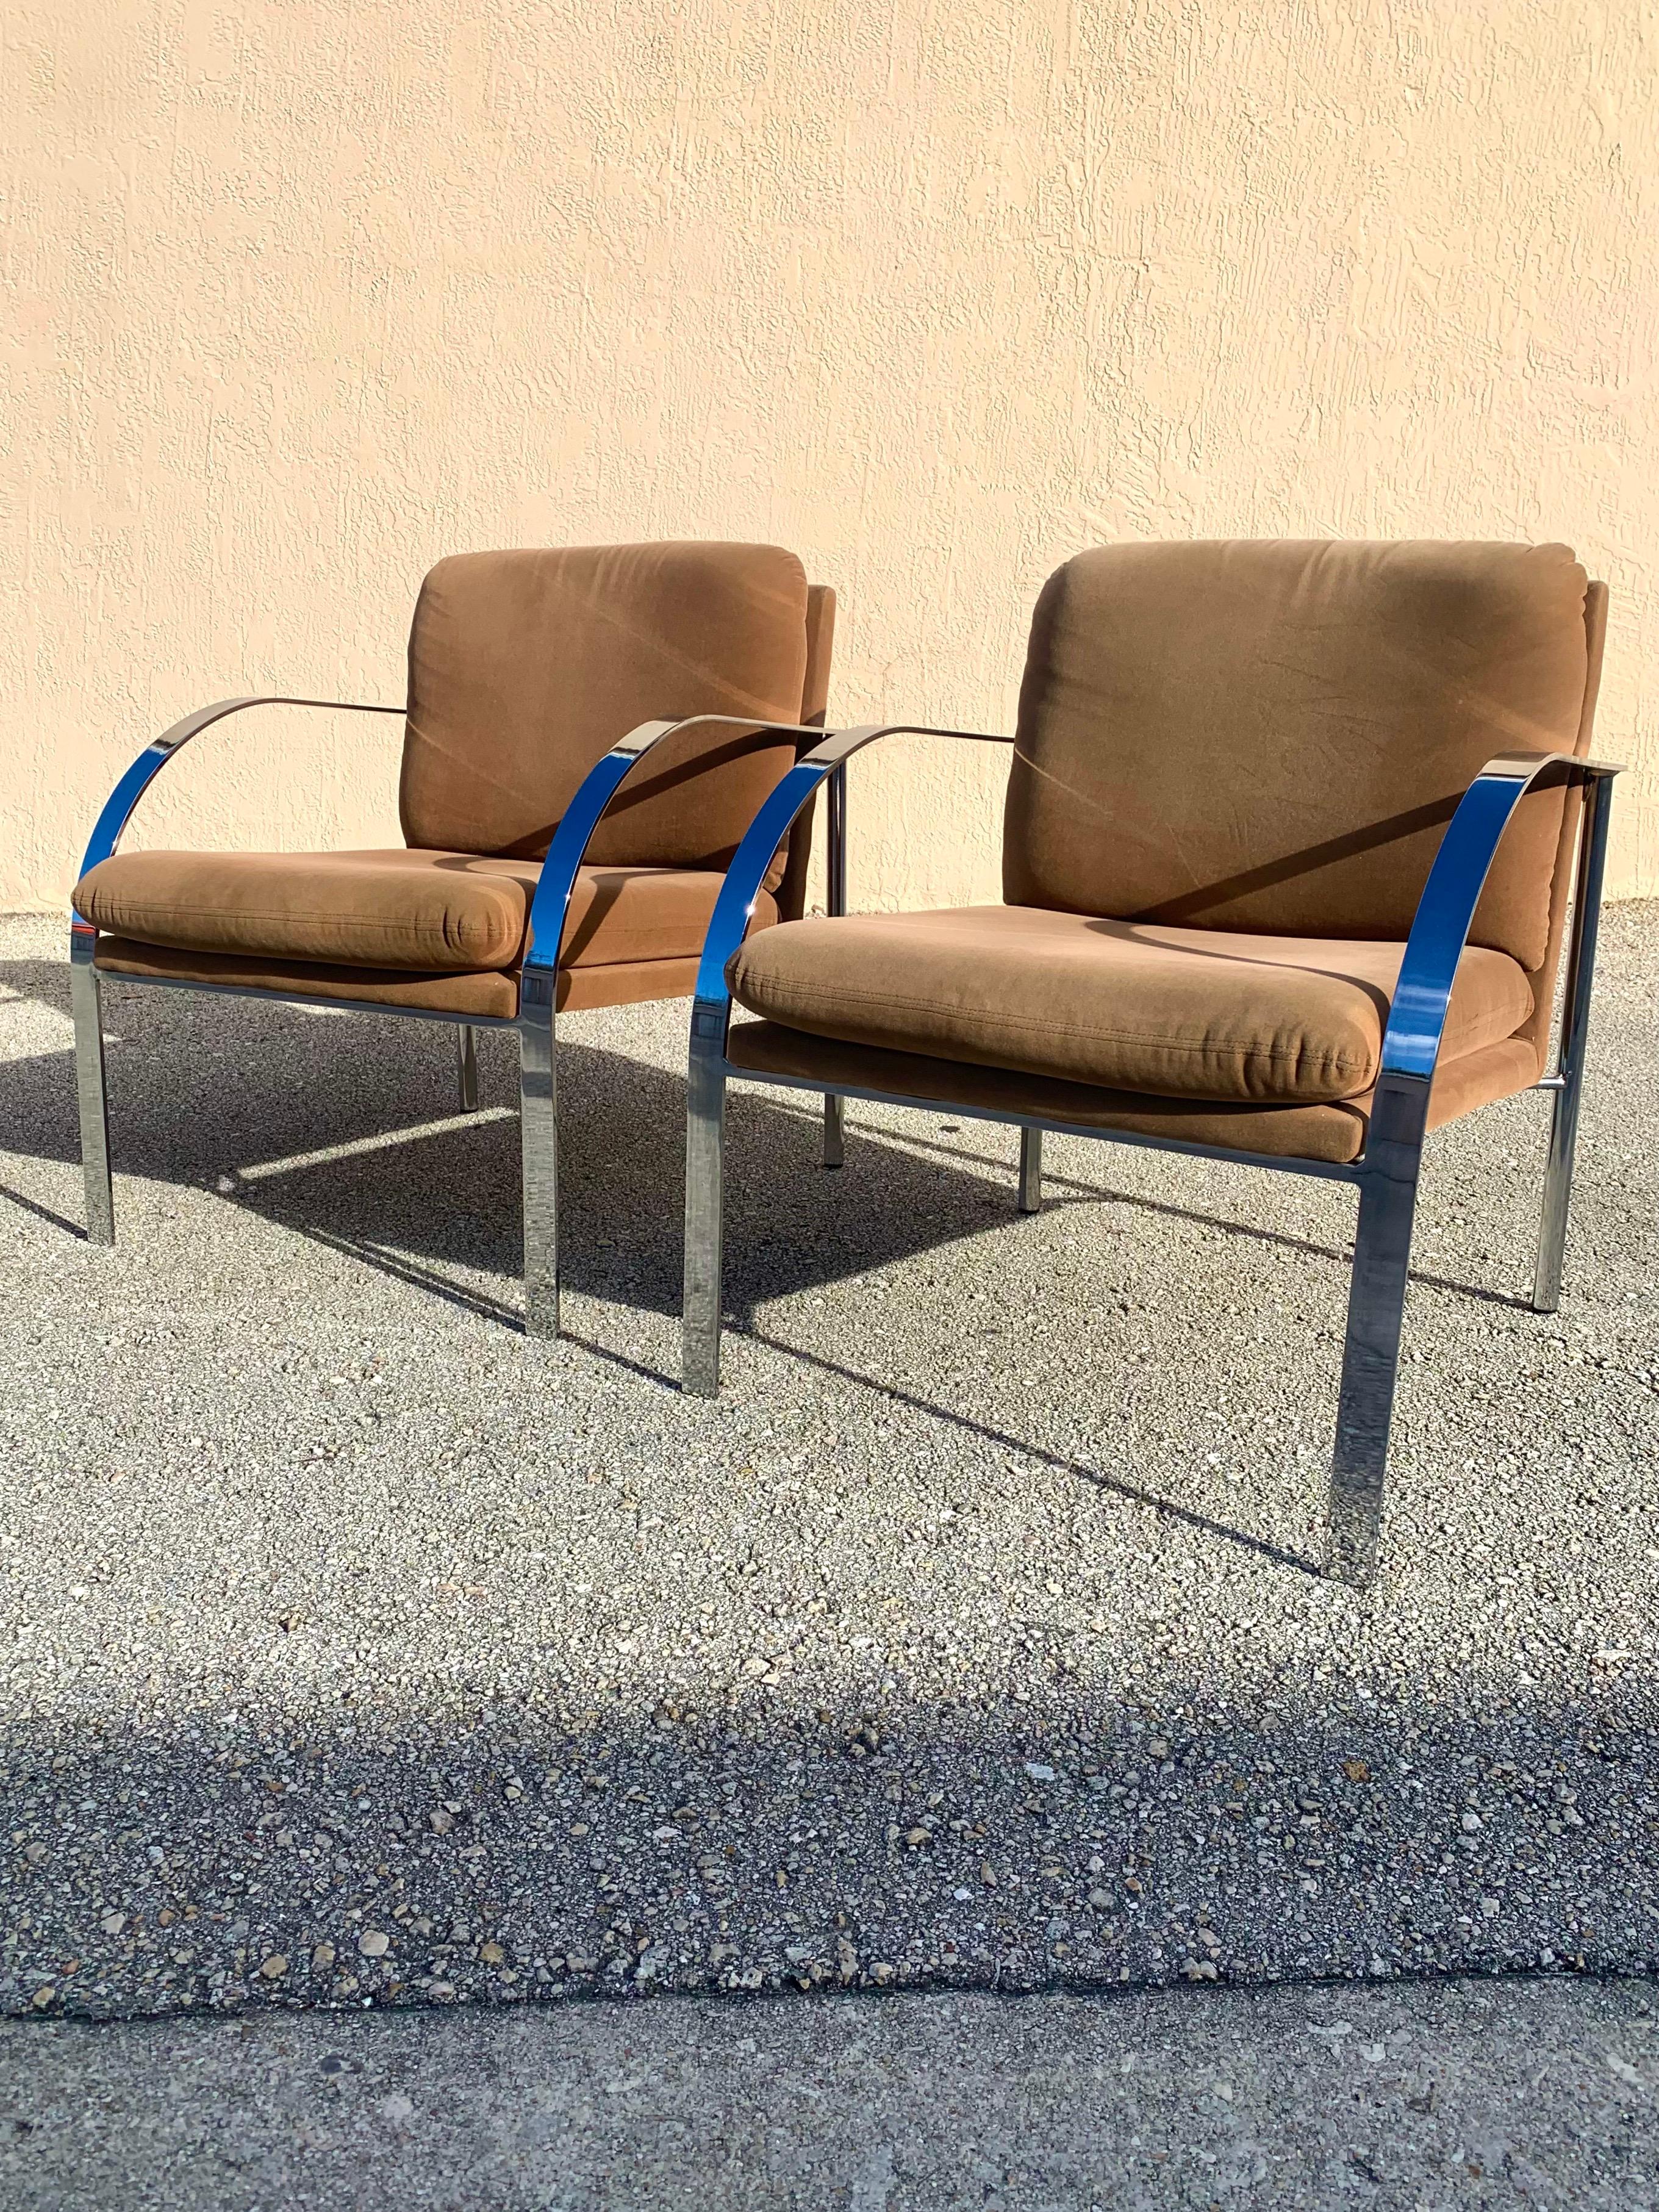 Pair of Mid-Century Modern flat bar chrome lounge chairs. With flat chrome arms and round supports. Chairs have a lovely flowing design. Made very well with the chrome being welded together rather than the screw together pieces manufactured today.